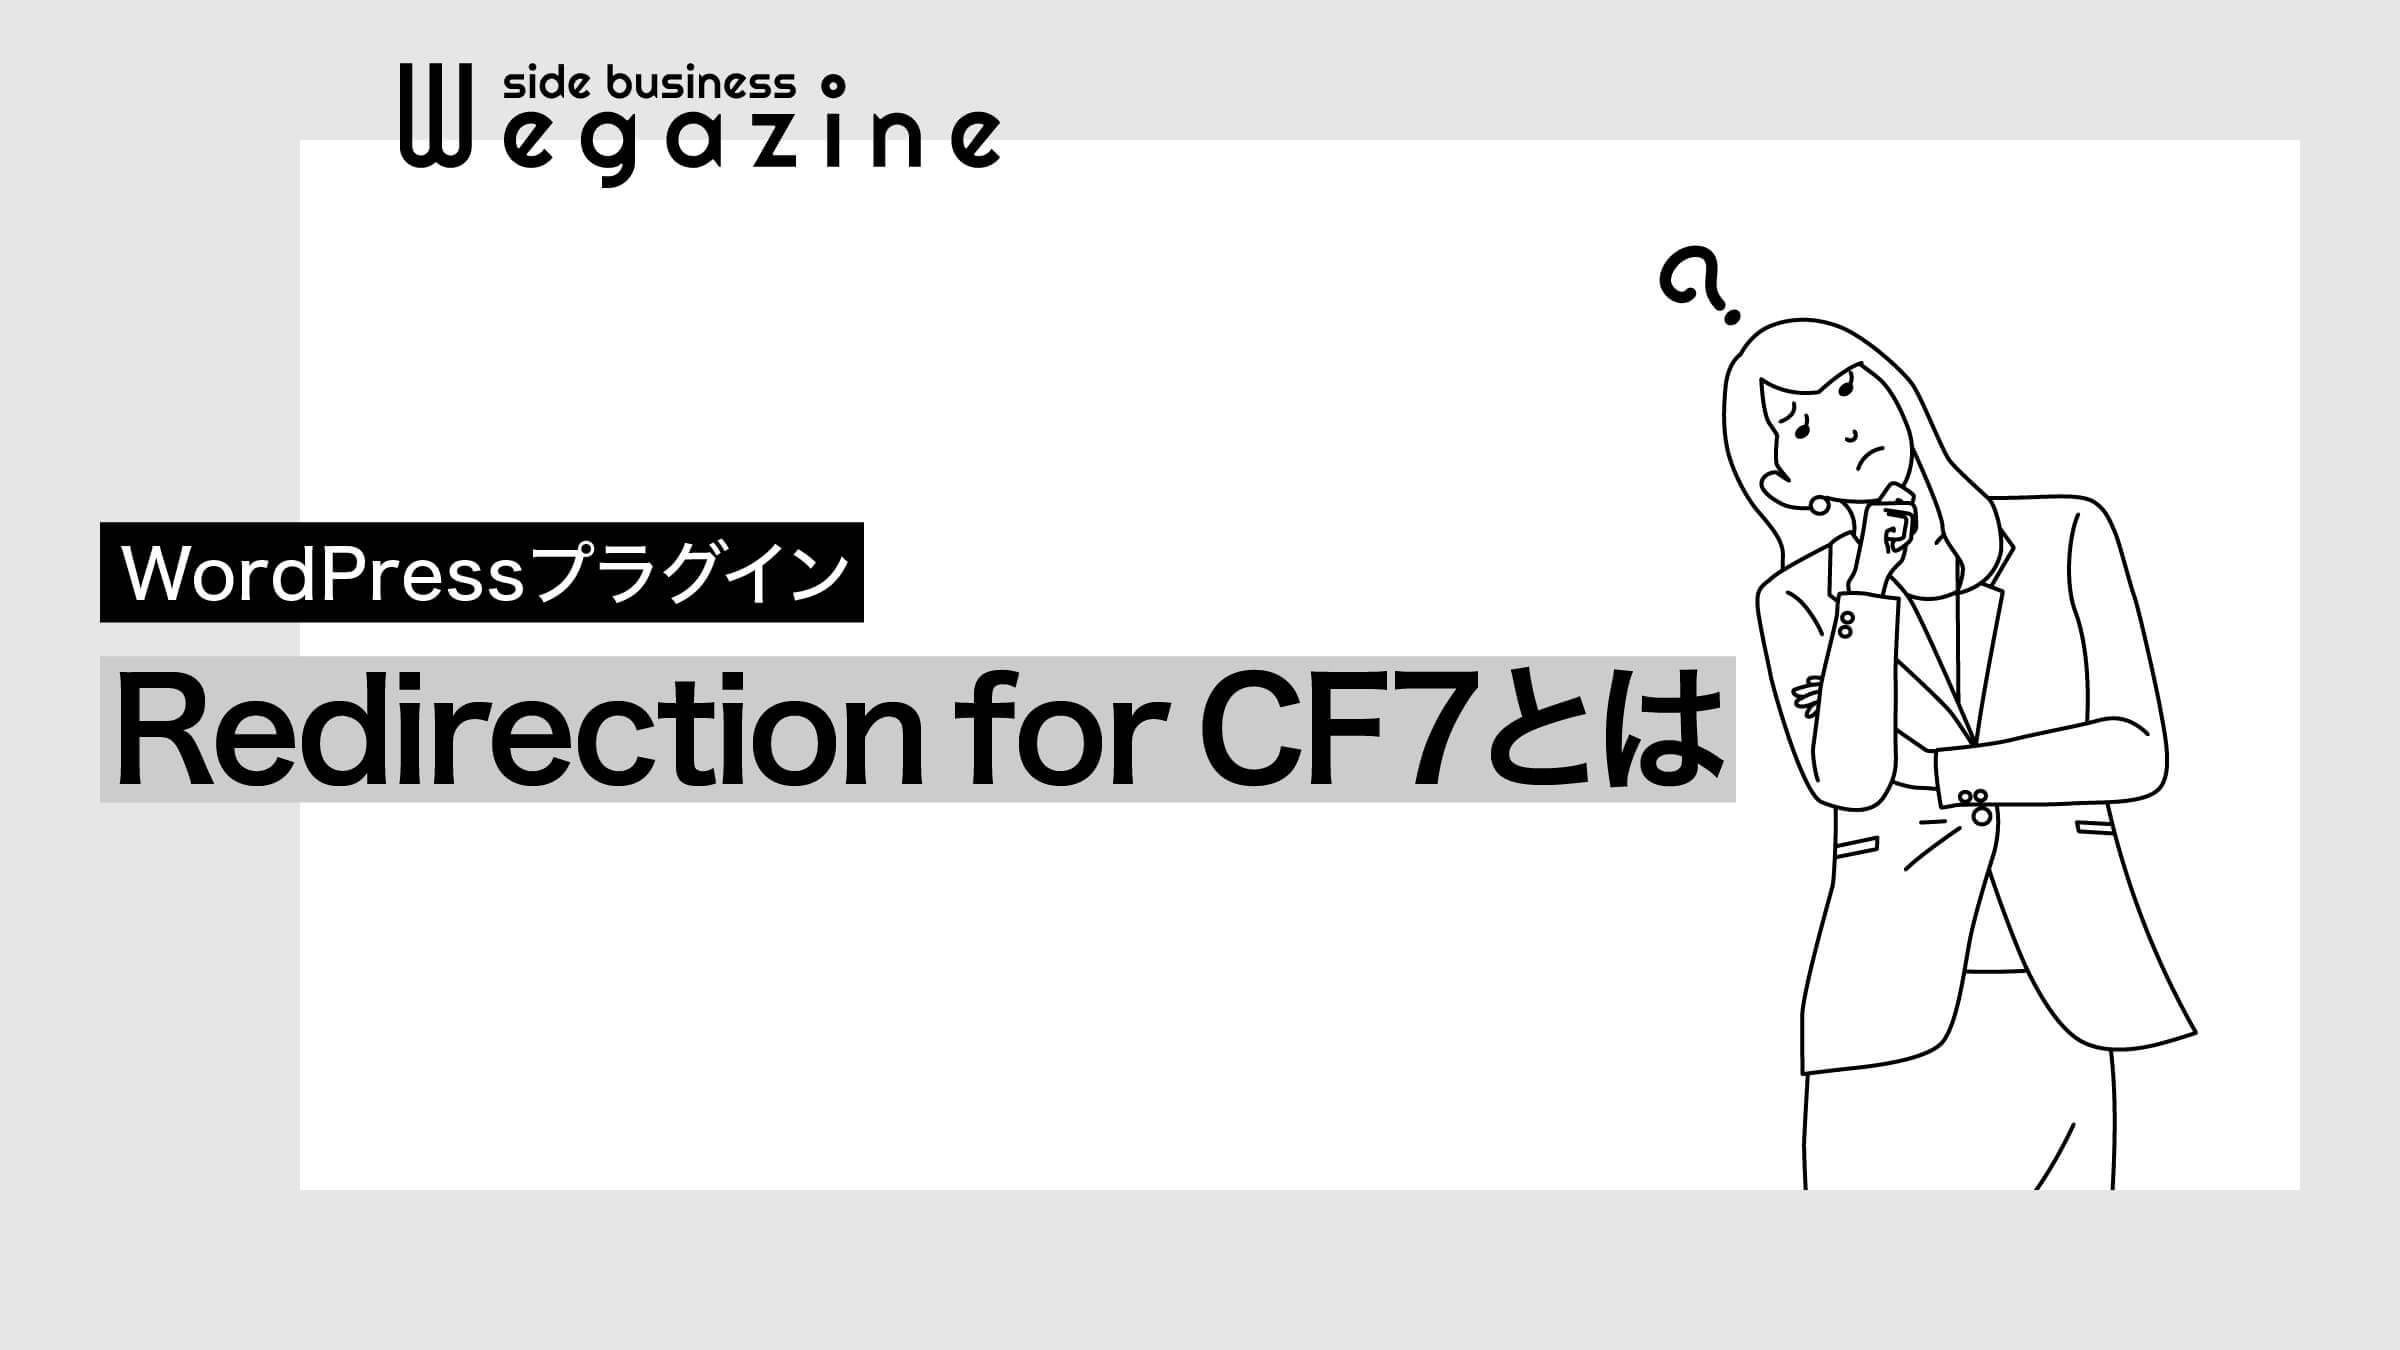 Redirection for Contact Form 7とは